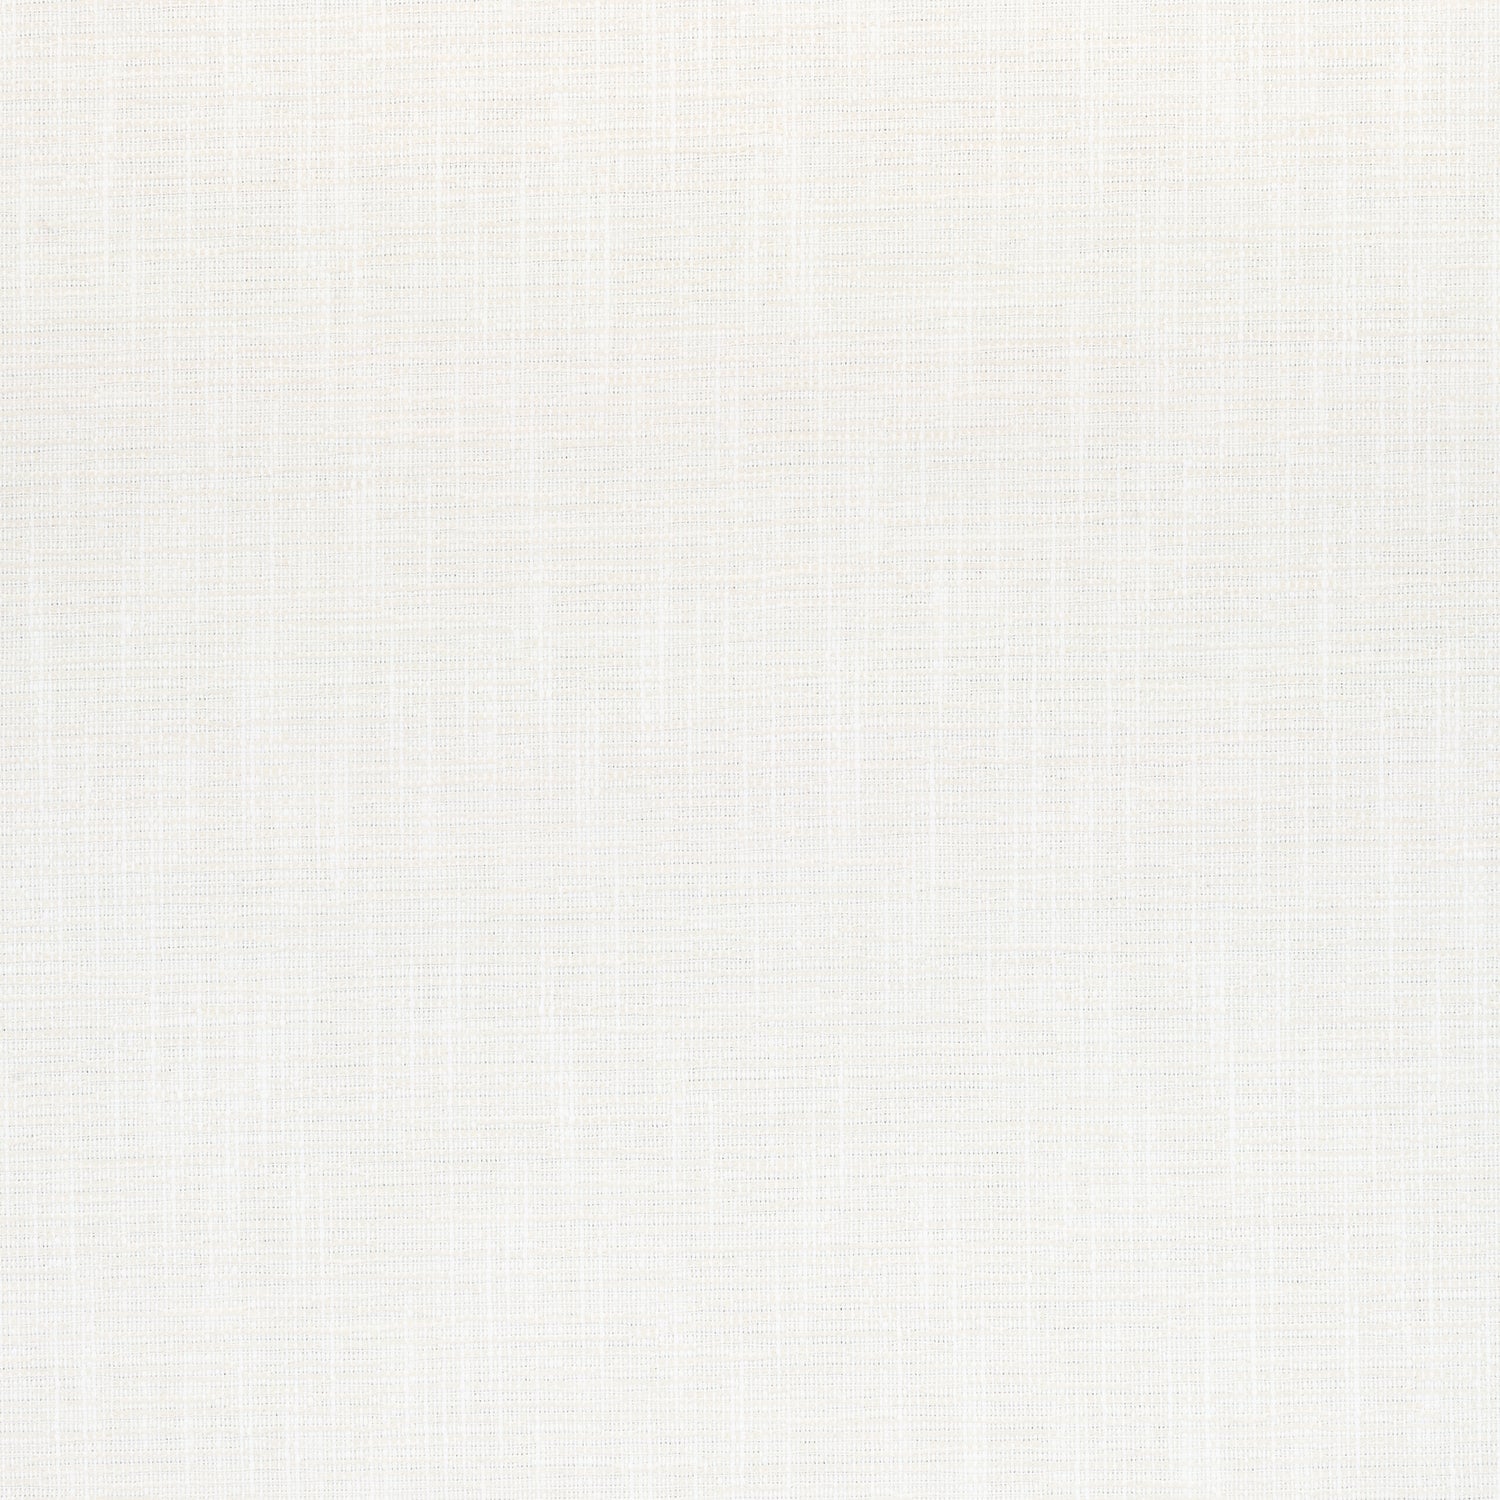 Piper fabric in ivory color - pattern number W73439 - by Thibaut in the Landmark Textures collection